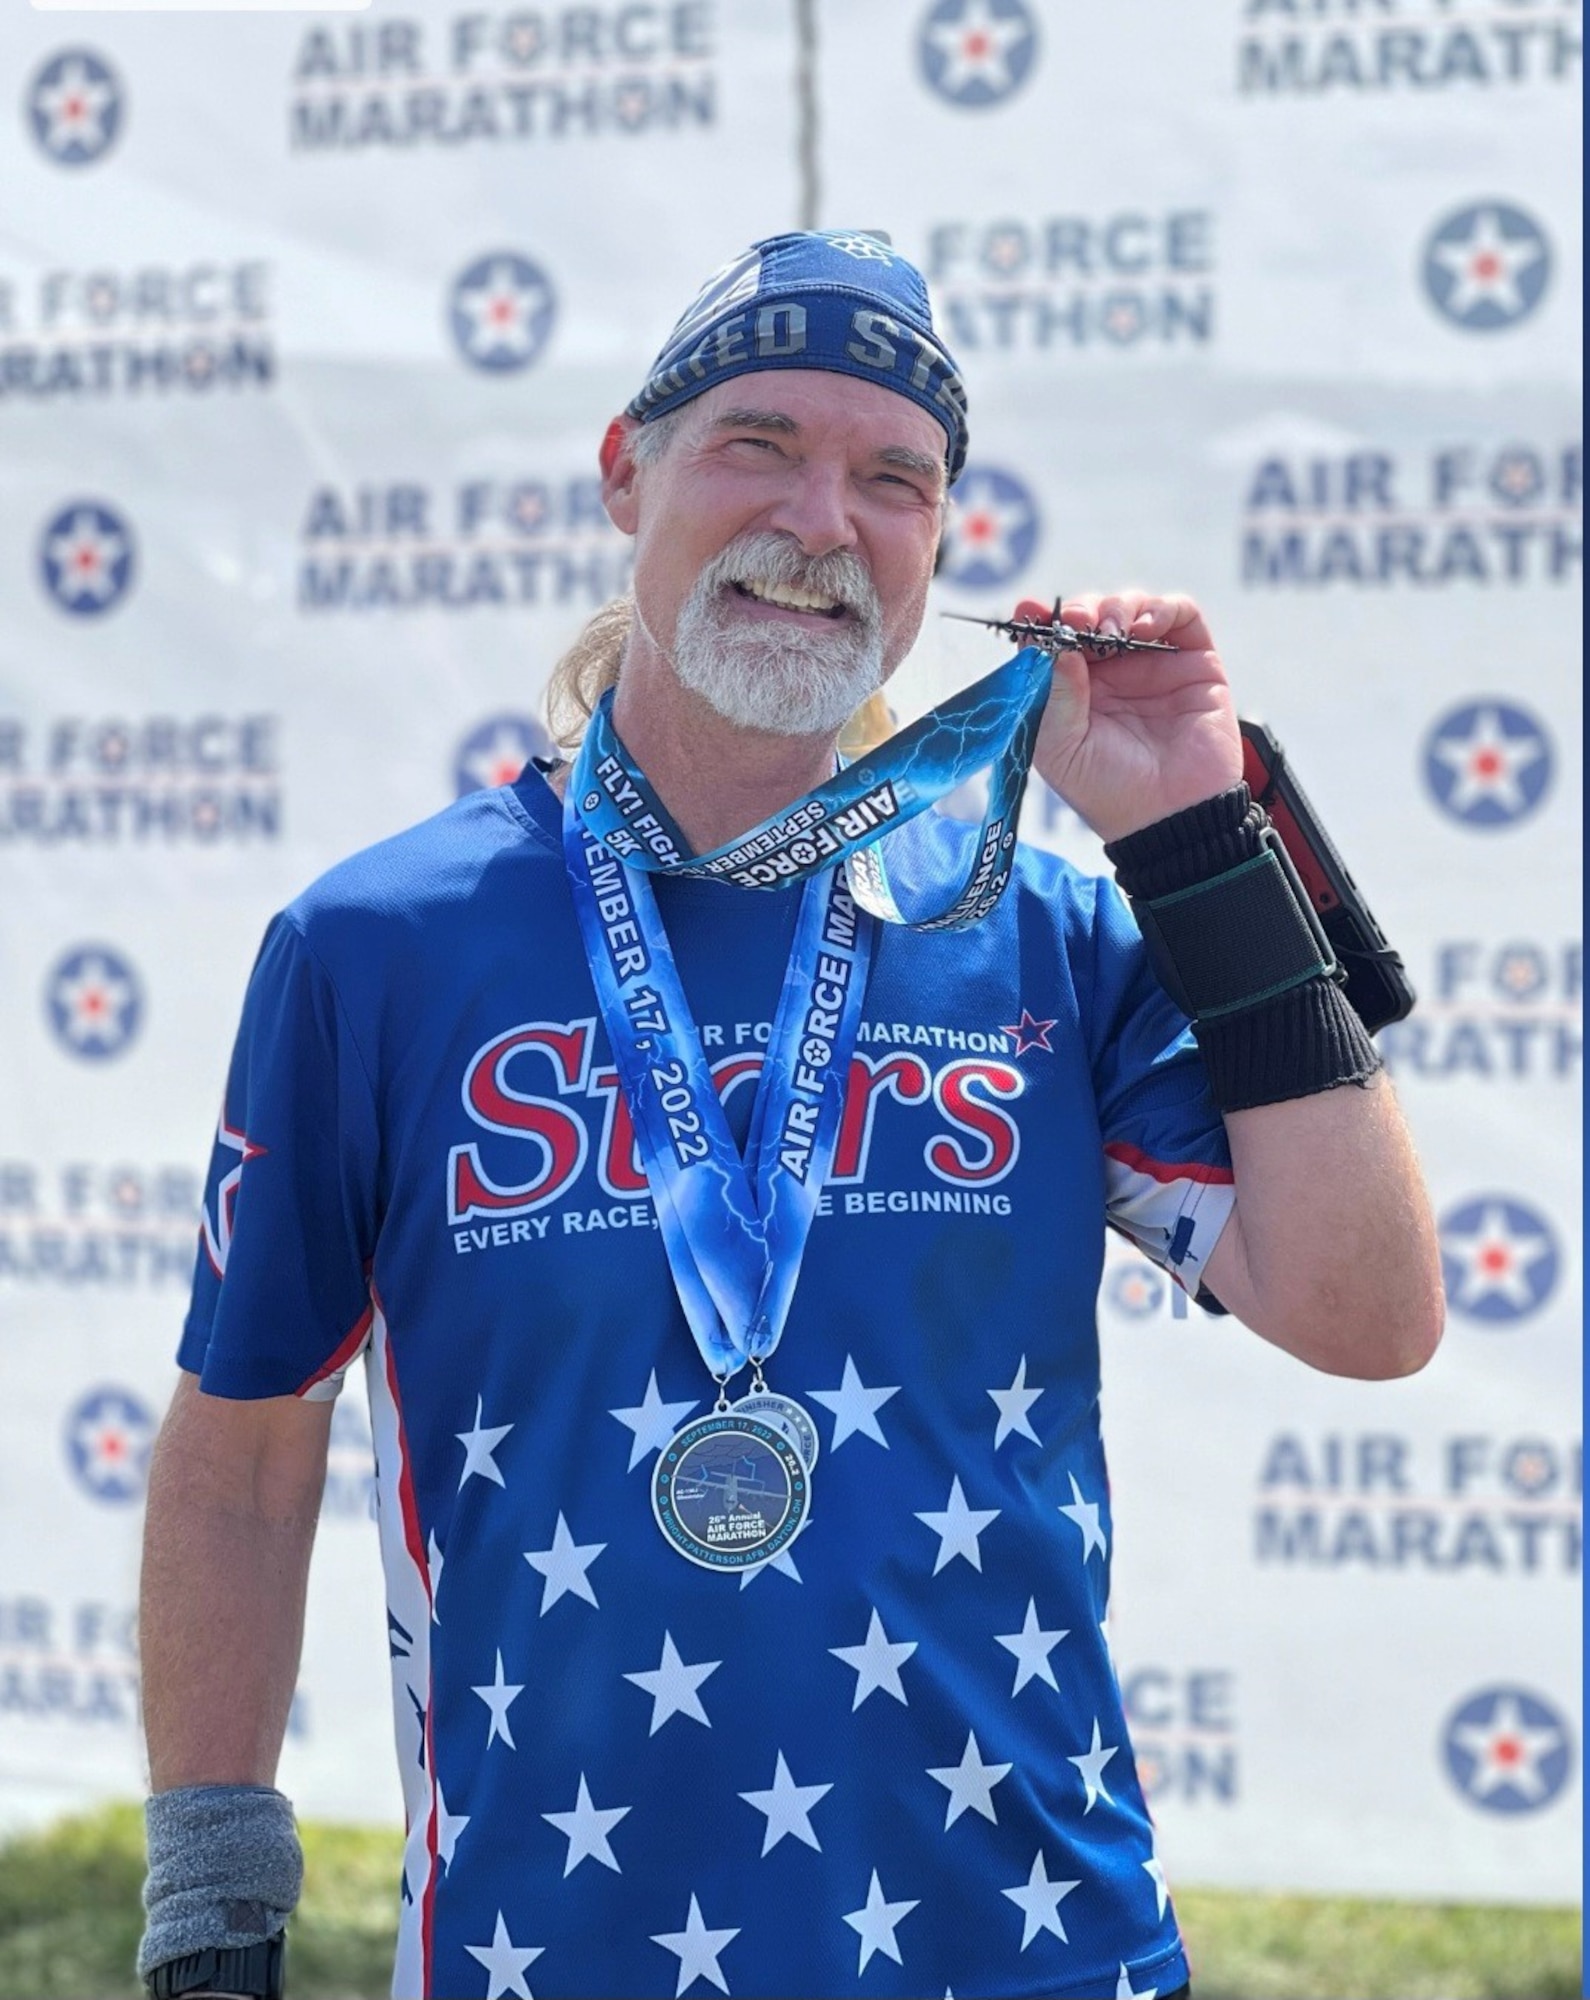 Gary Moroney poses for a photo with his medal upon completion of an Air Force Marathon event at the National Museum of the U.S. Air Force on Wright-Patterson Air Force Base, Ohio, Sept. 17, 2022. Moroney has participated in every Air Force Marathon since its inception. (Courtesy Photo)